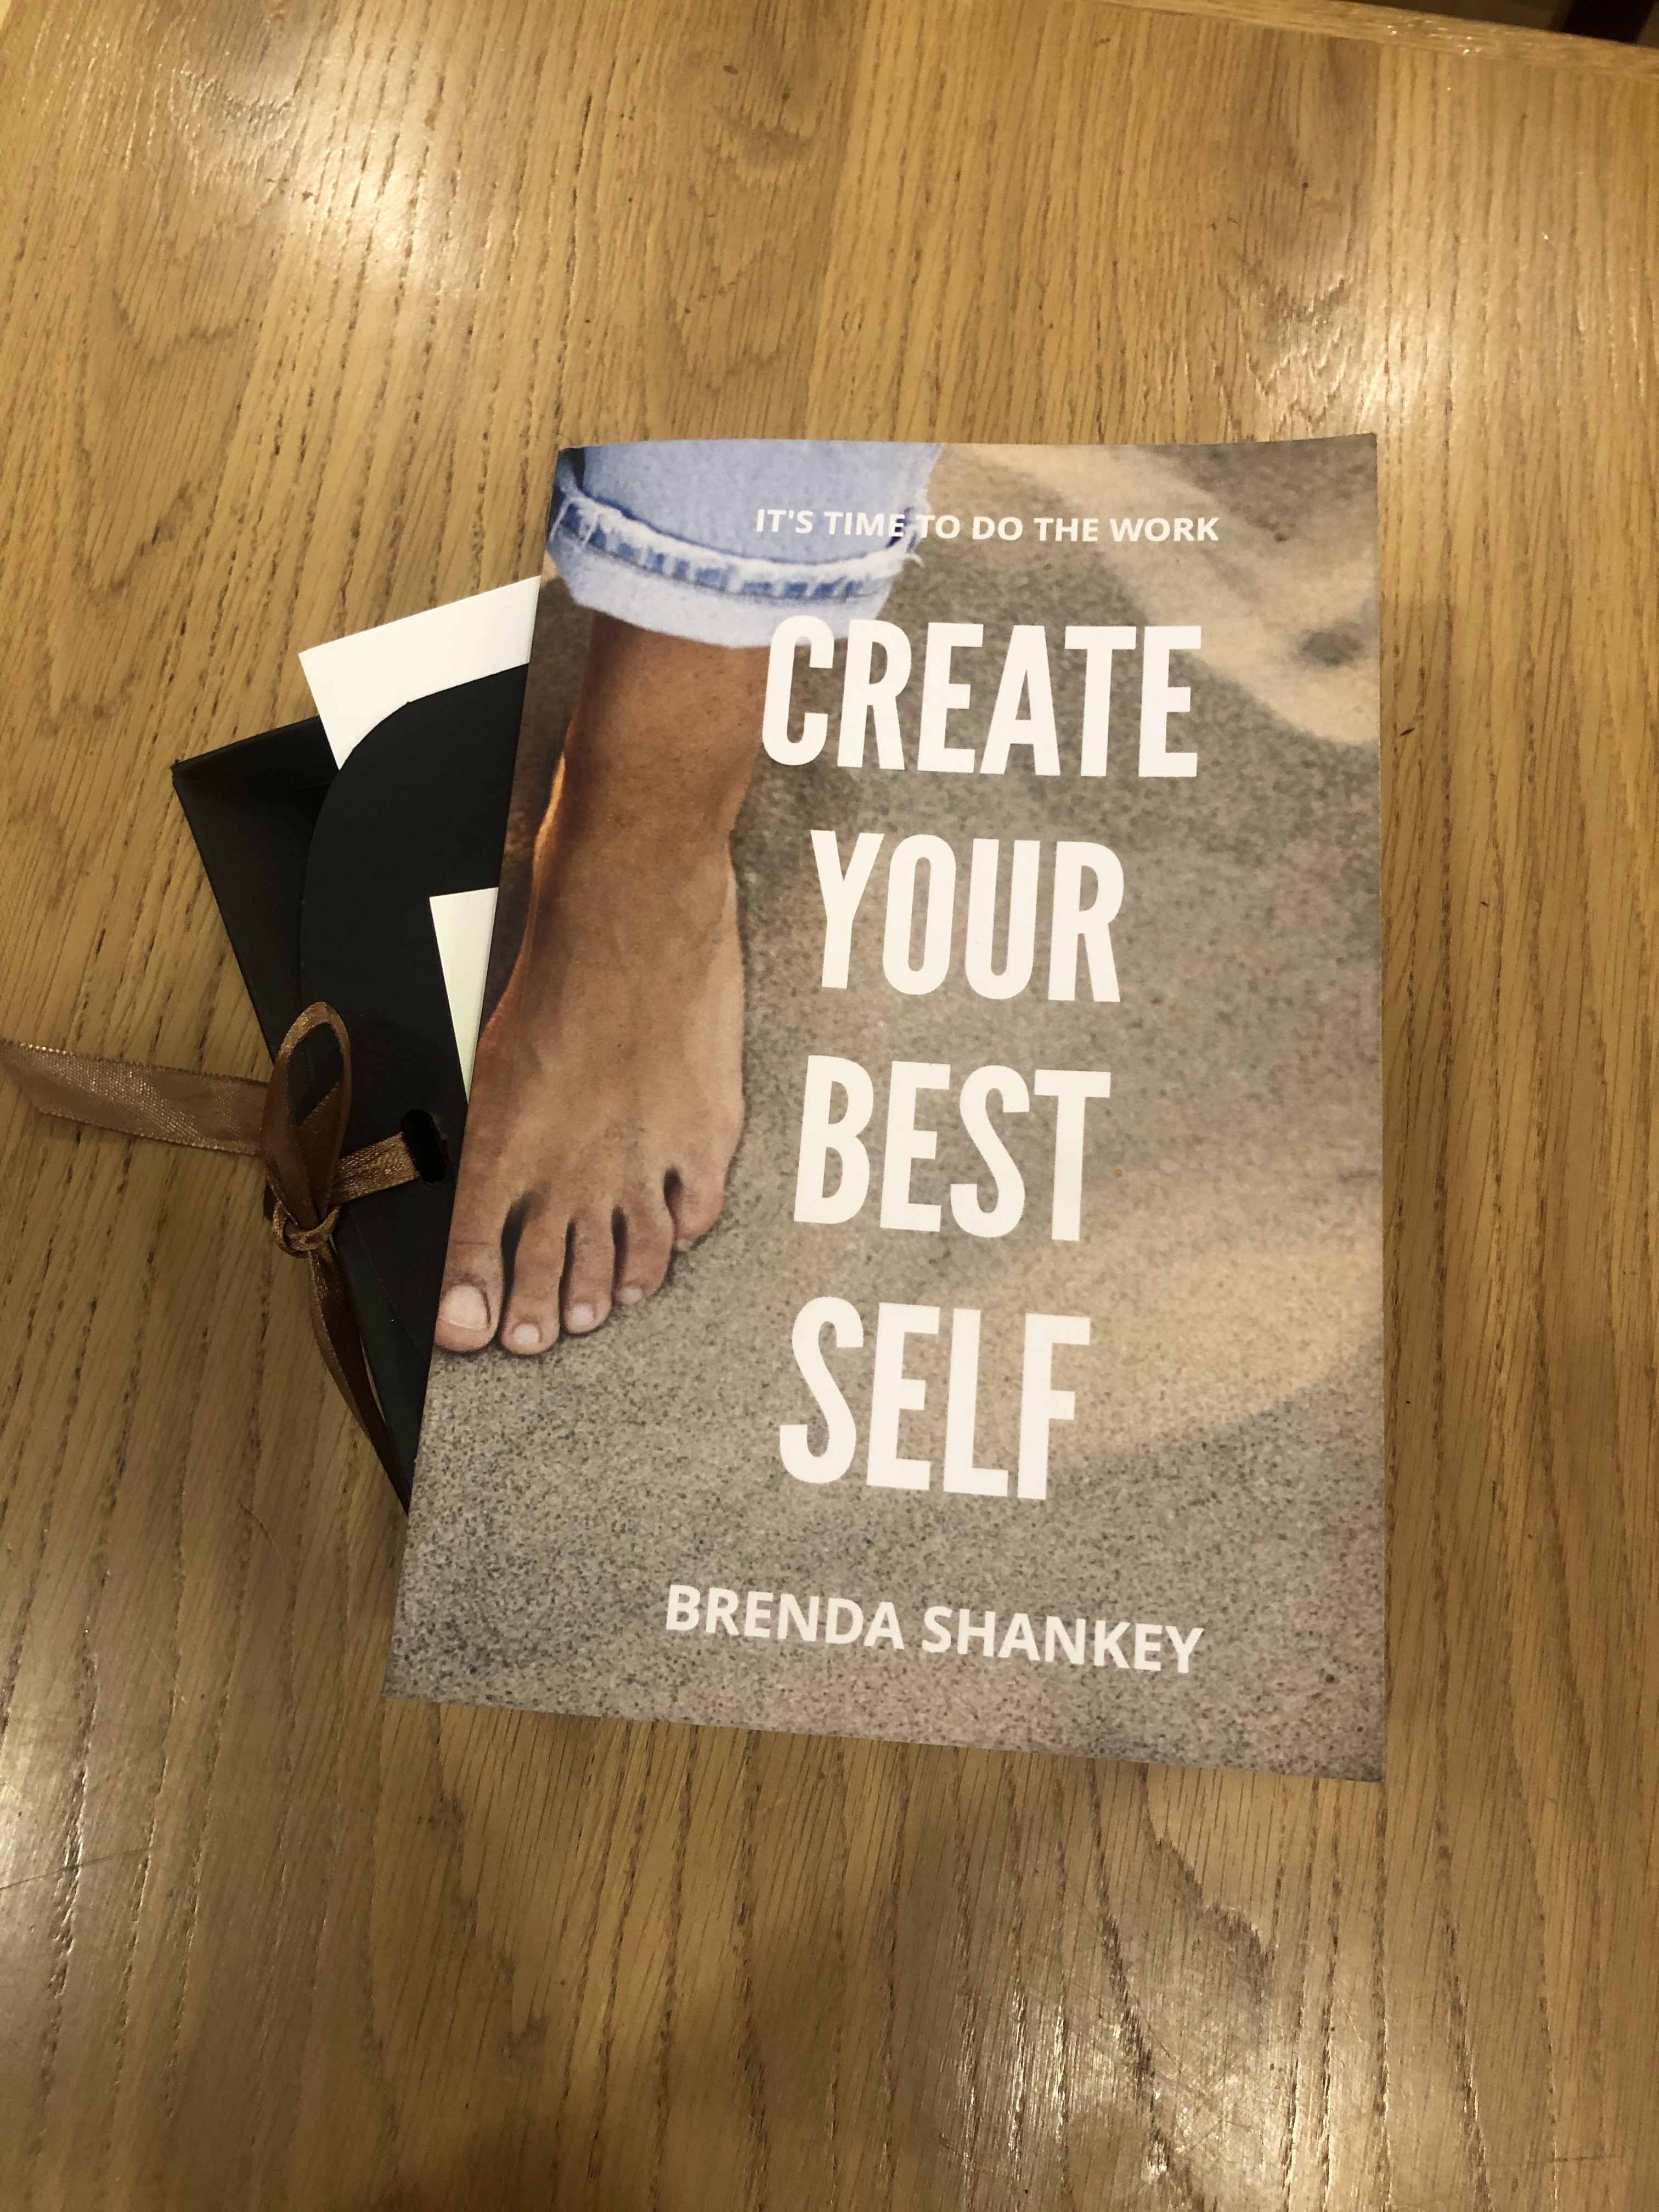 A chat with Brenda Shankey 'Create Your Best Self'